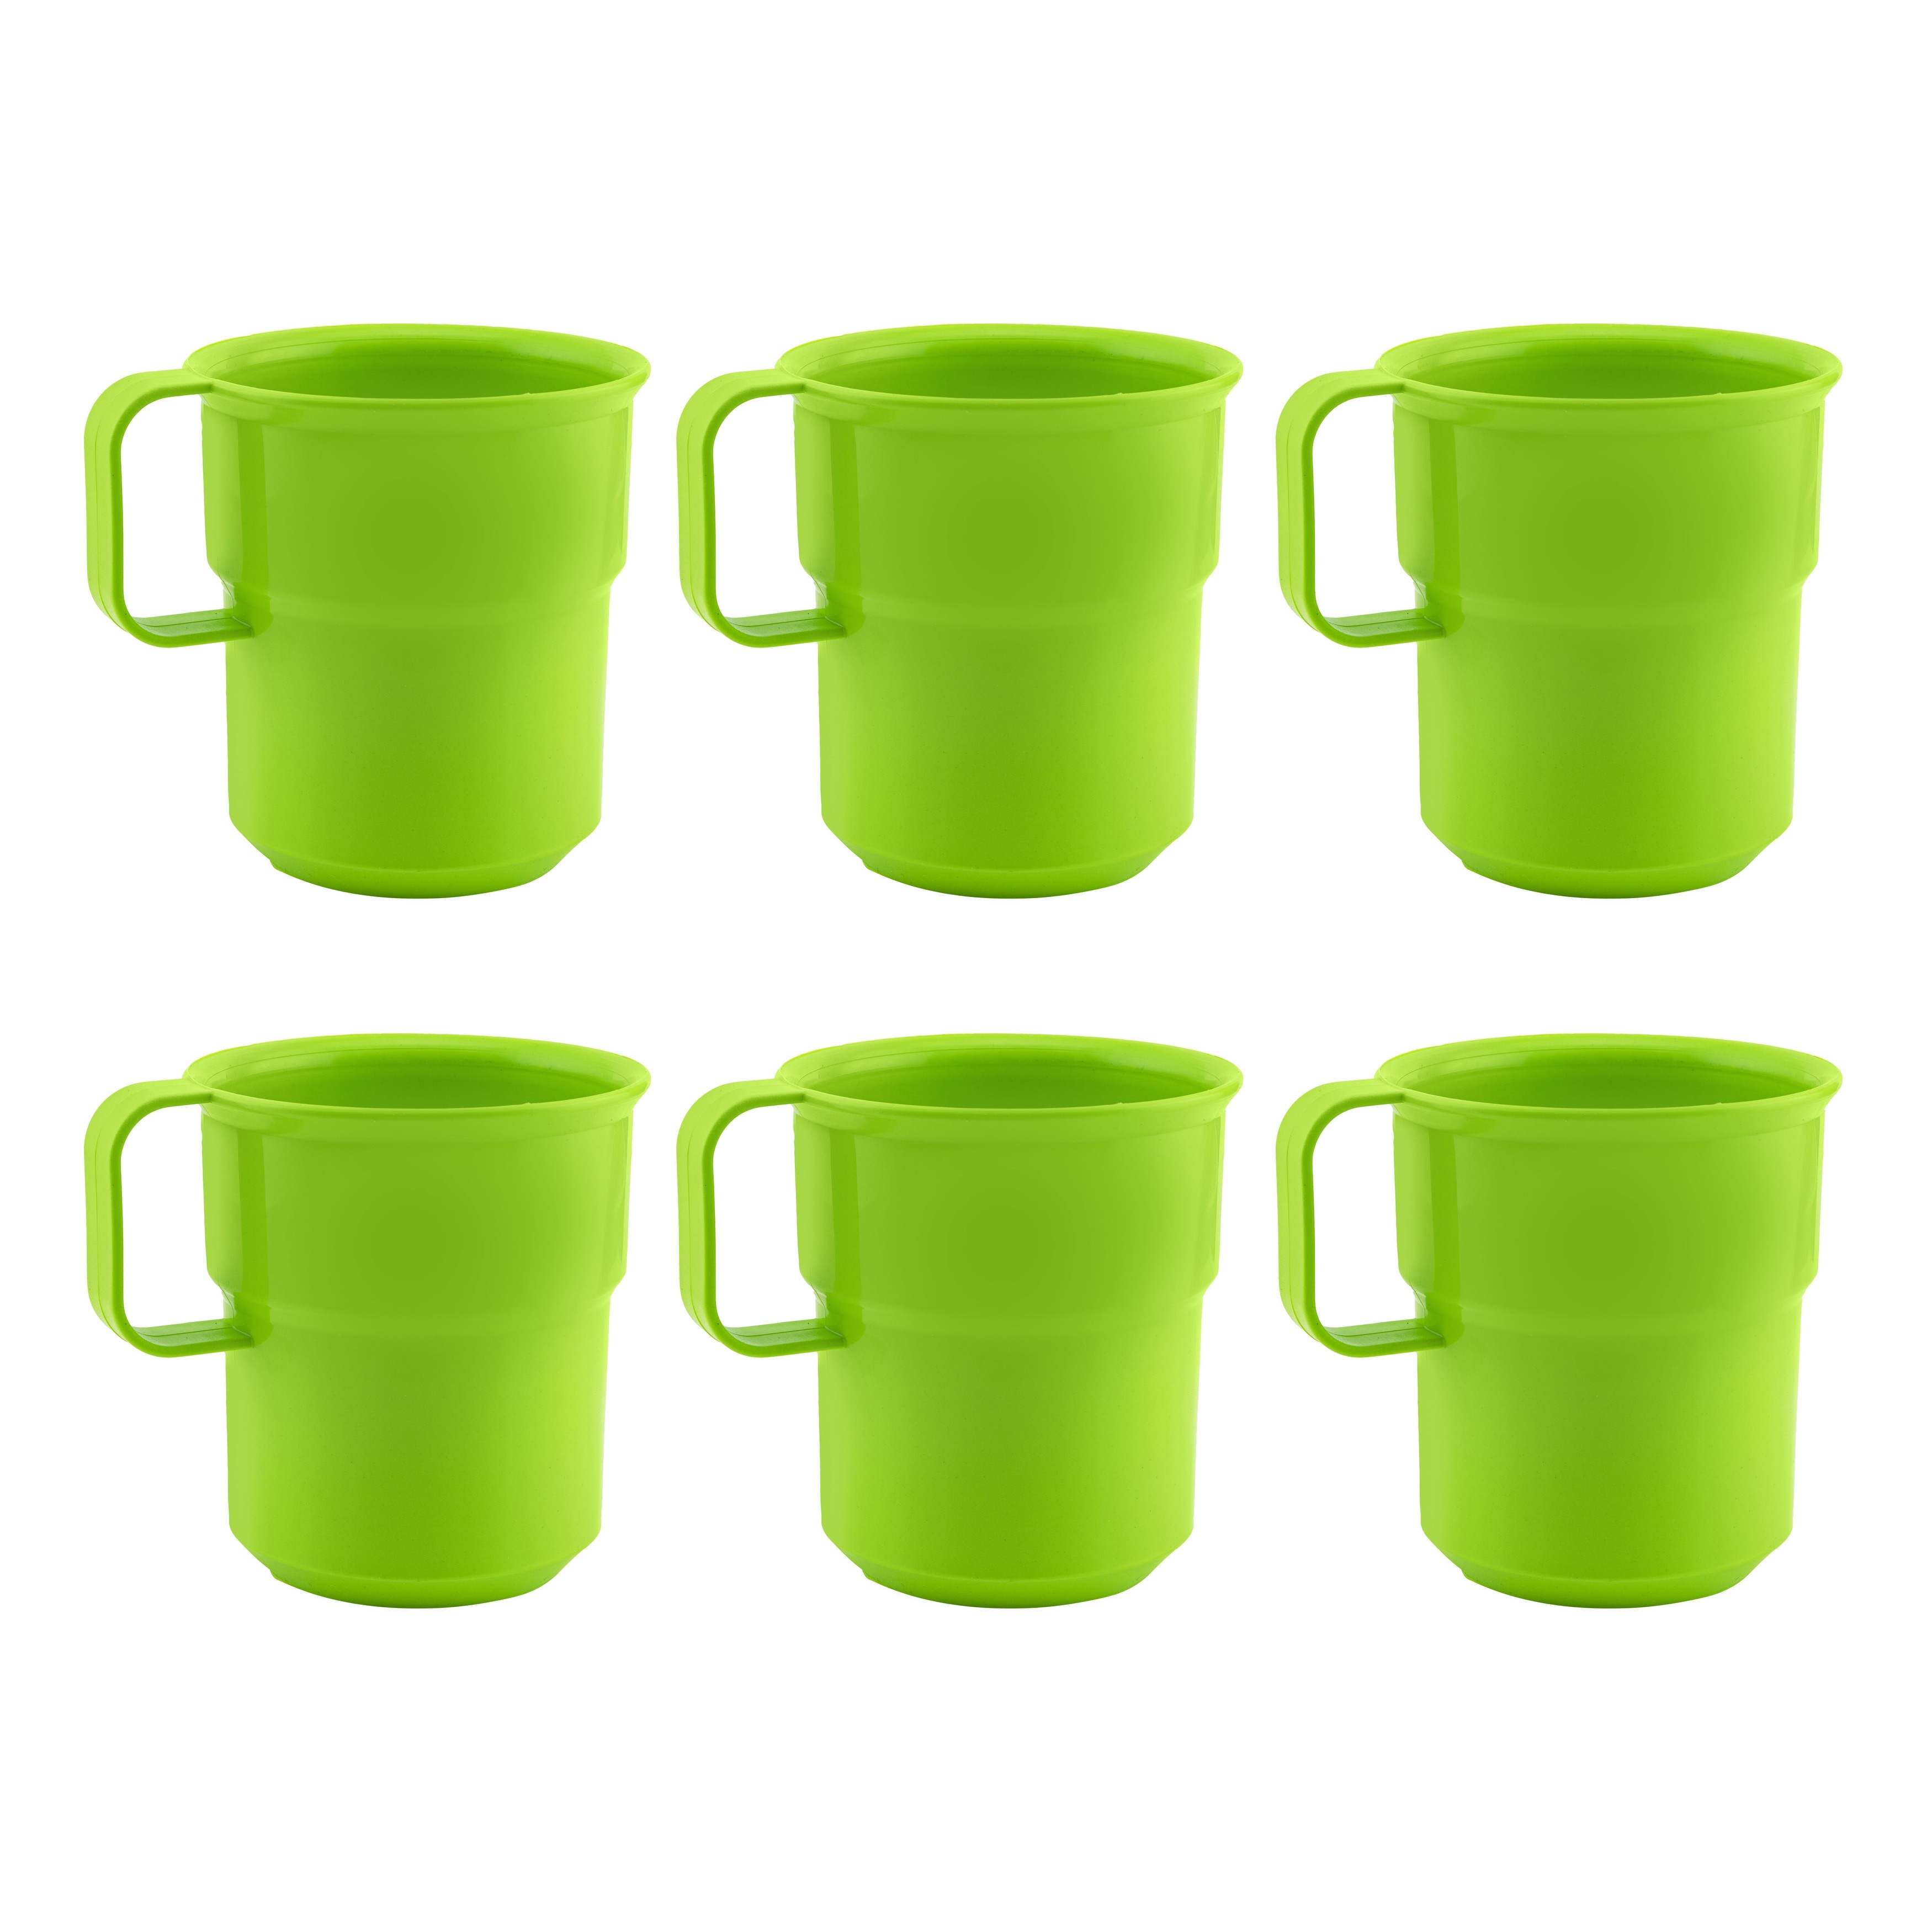 6 Pack Unbreakable Wheat Straw Cups for Coffee, Tea, Milk, Juice, 3 Colors,  Light Blue, Green, and Pink, Reusable Mugs, Dishwasher and Microwave-Safe  (13.8 Ounces)